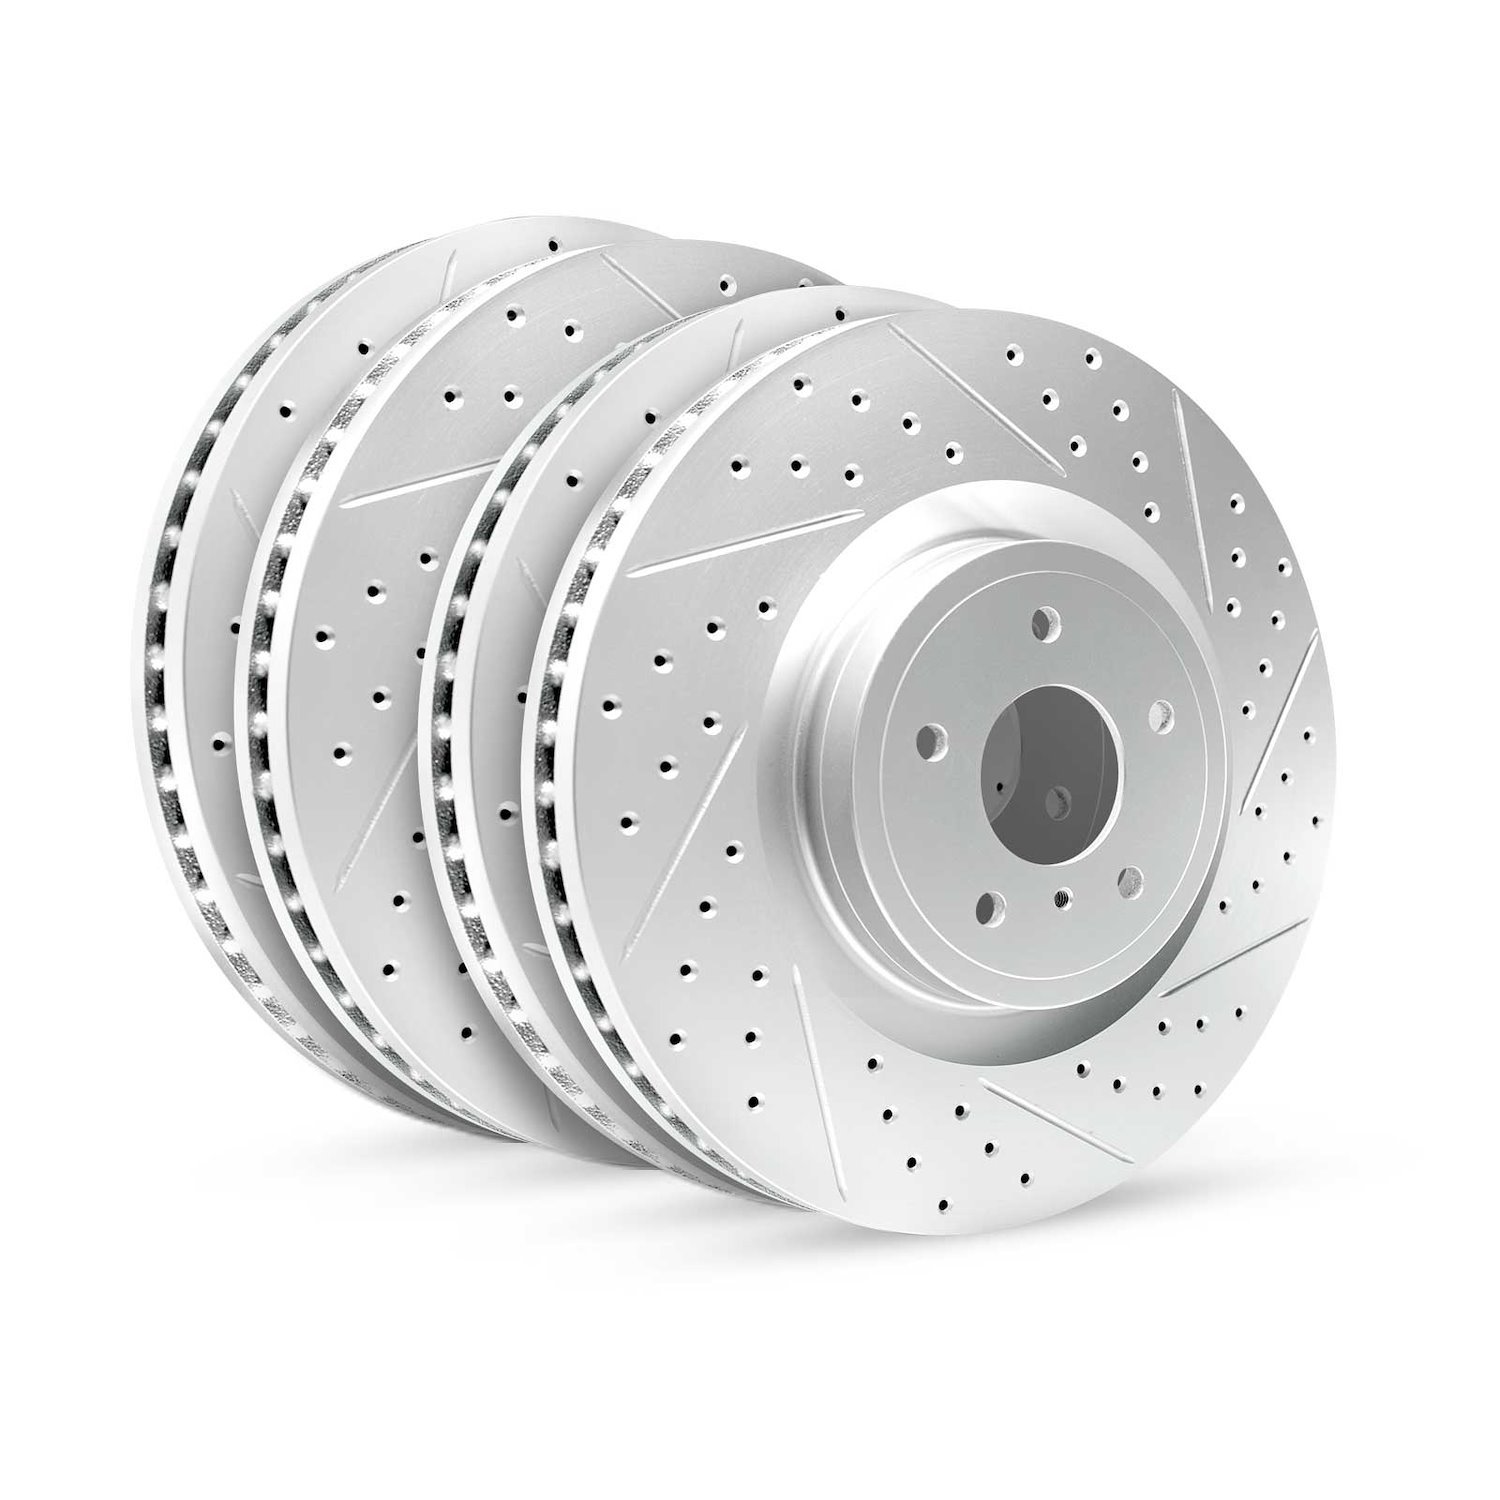 GEO-Carbon Drilled/Slotted Rotors, 2007-2009 Kia/Hyundai/Genesis, Position: Front/Rear